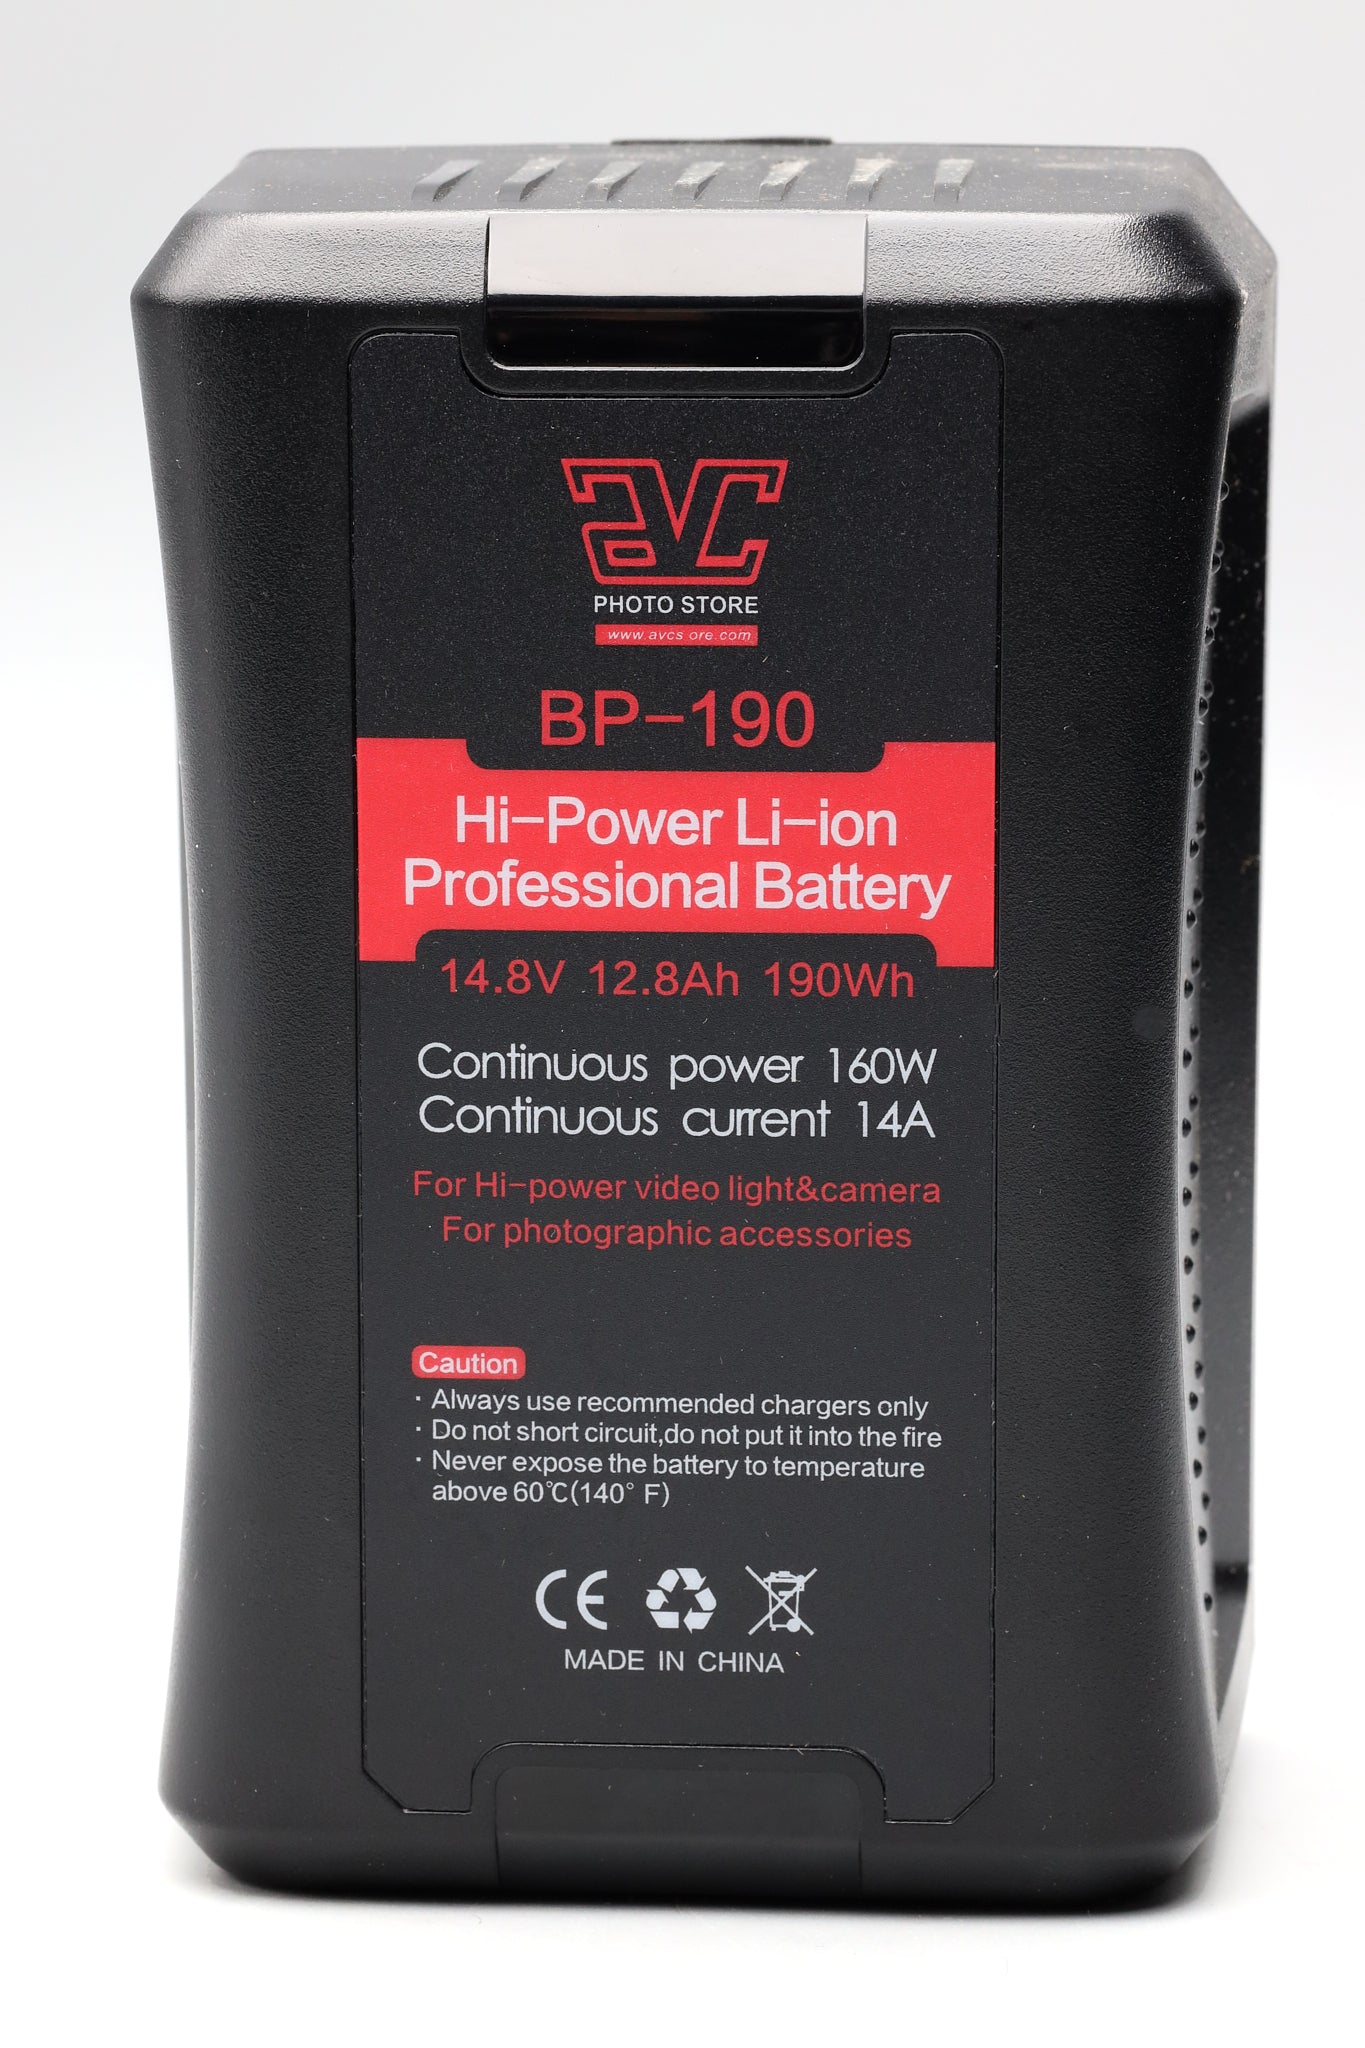 AVC BP190 Lithium Ion  Professional Battery, 14.8V 12.8Ah 190Wh.